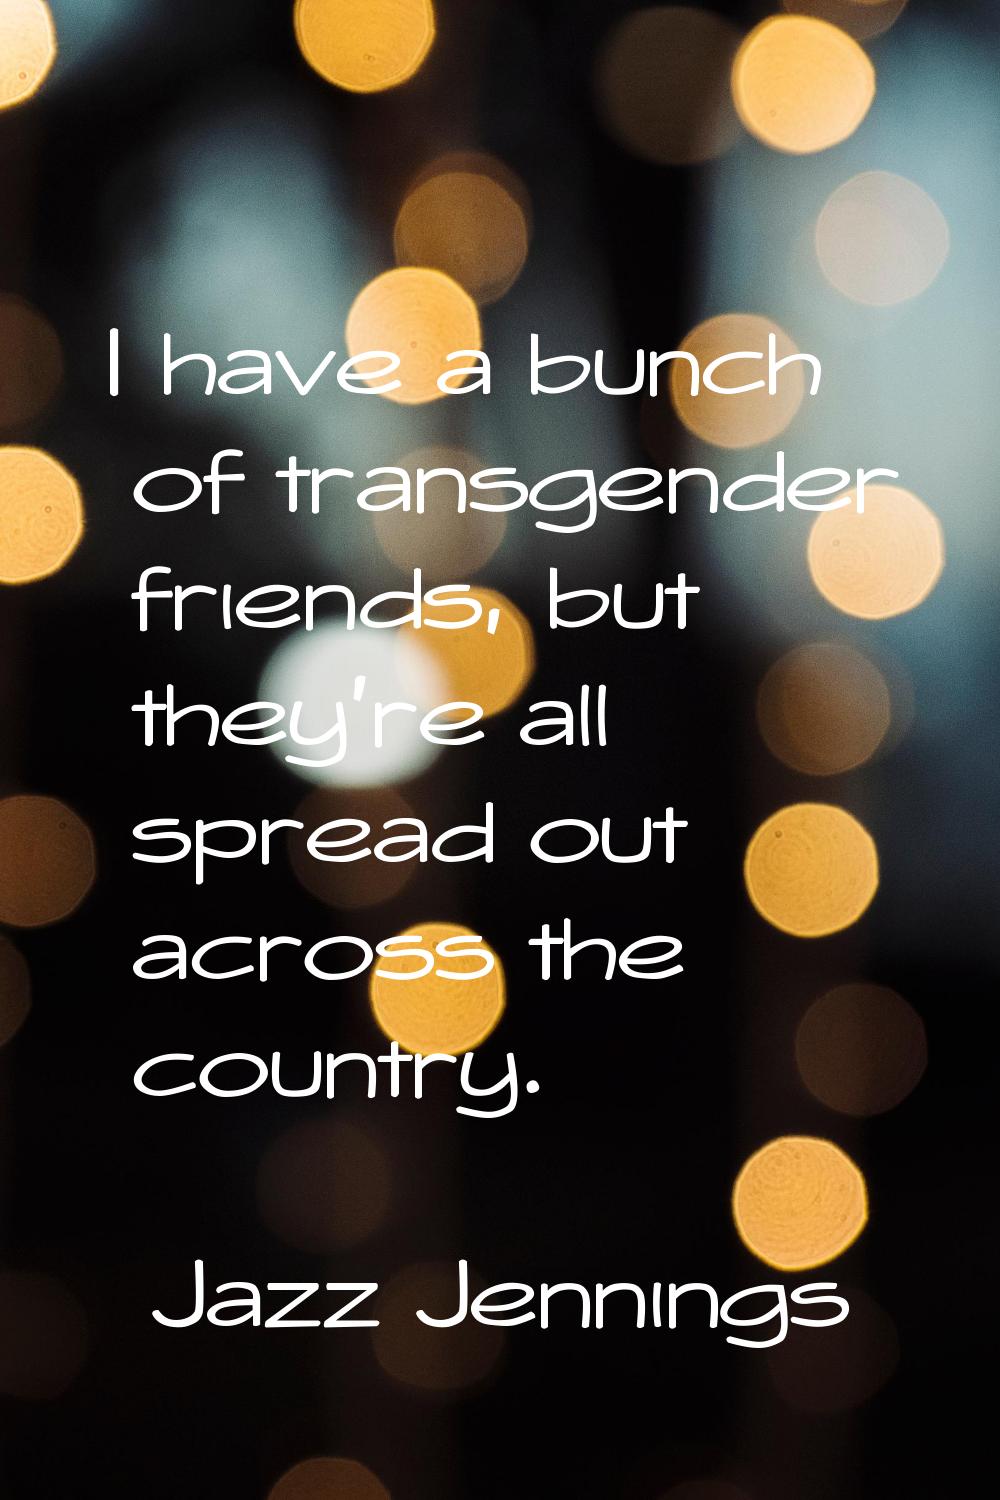 I have a bunch of transgender friends, but they're all spread out across the country.